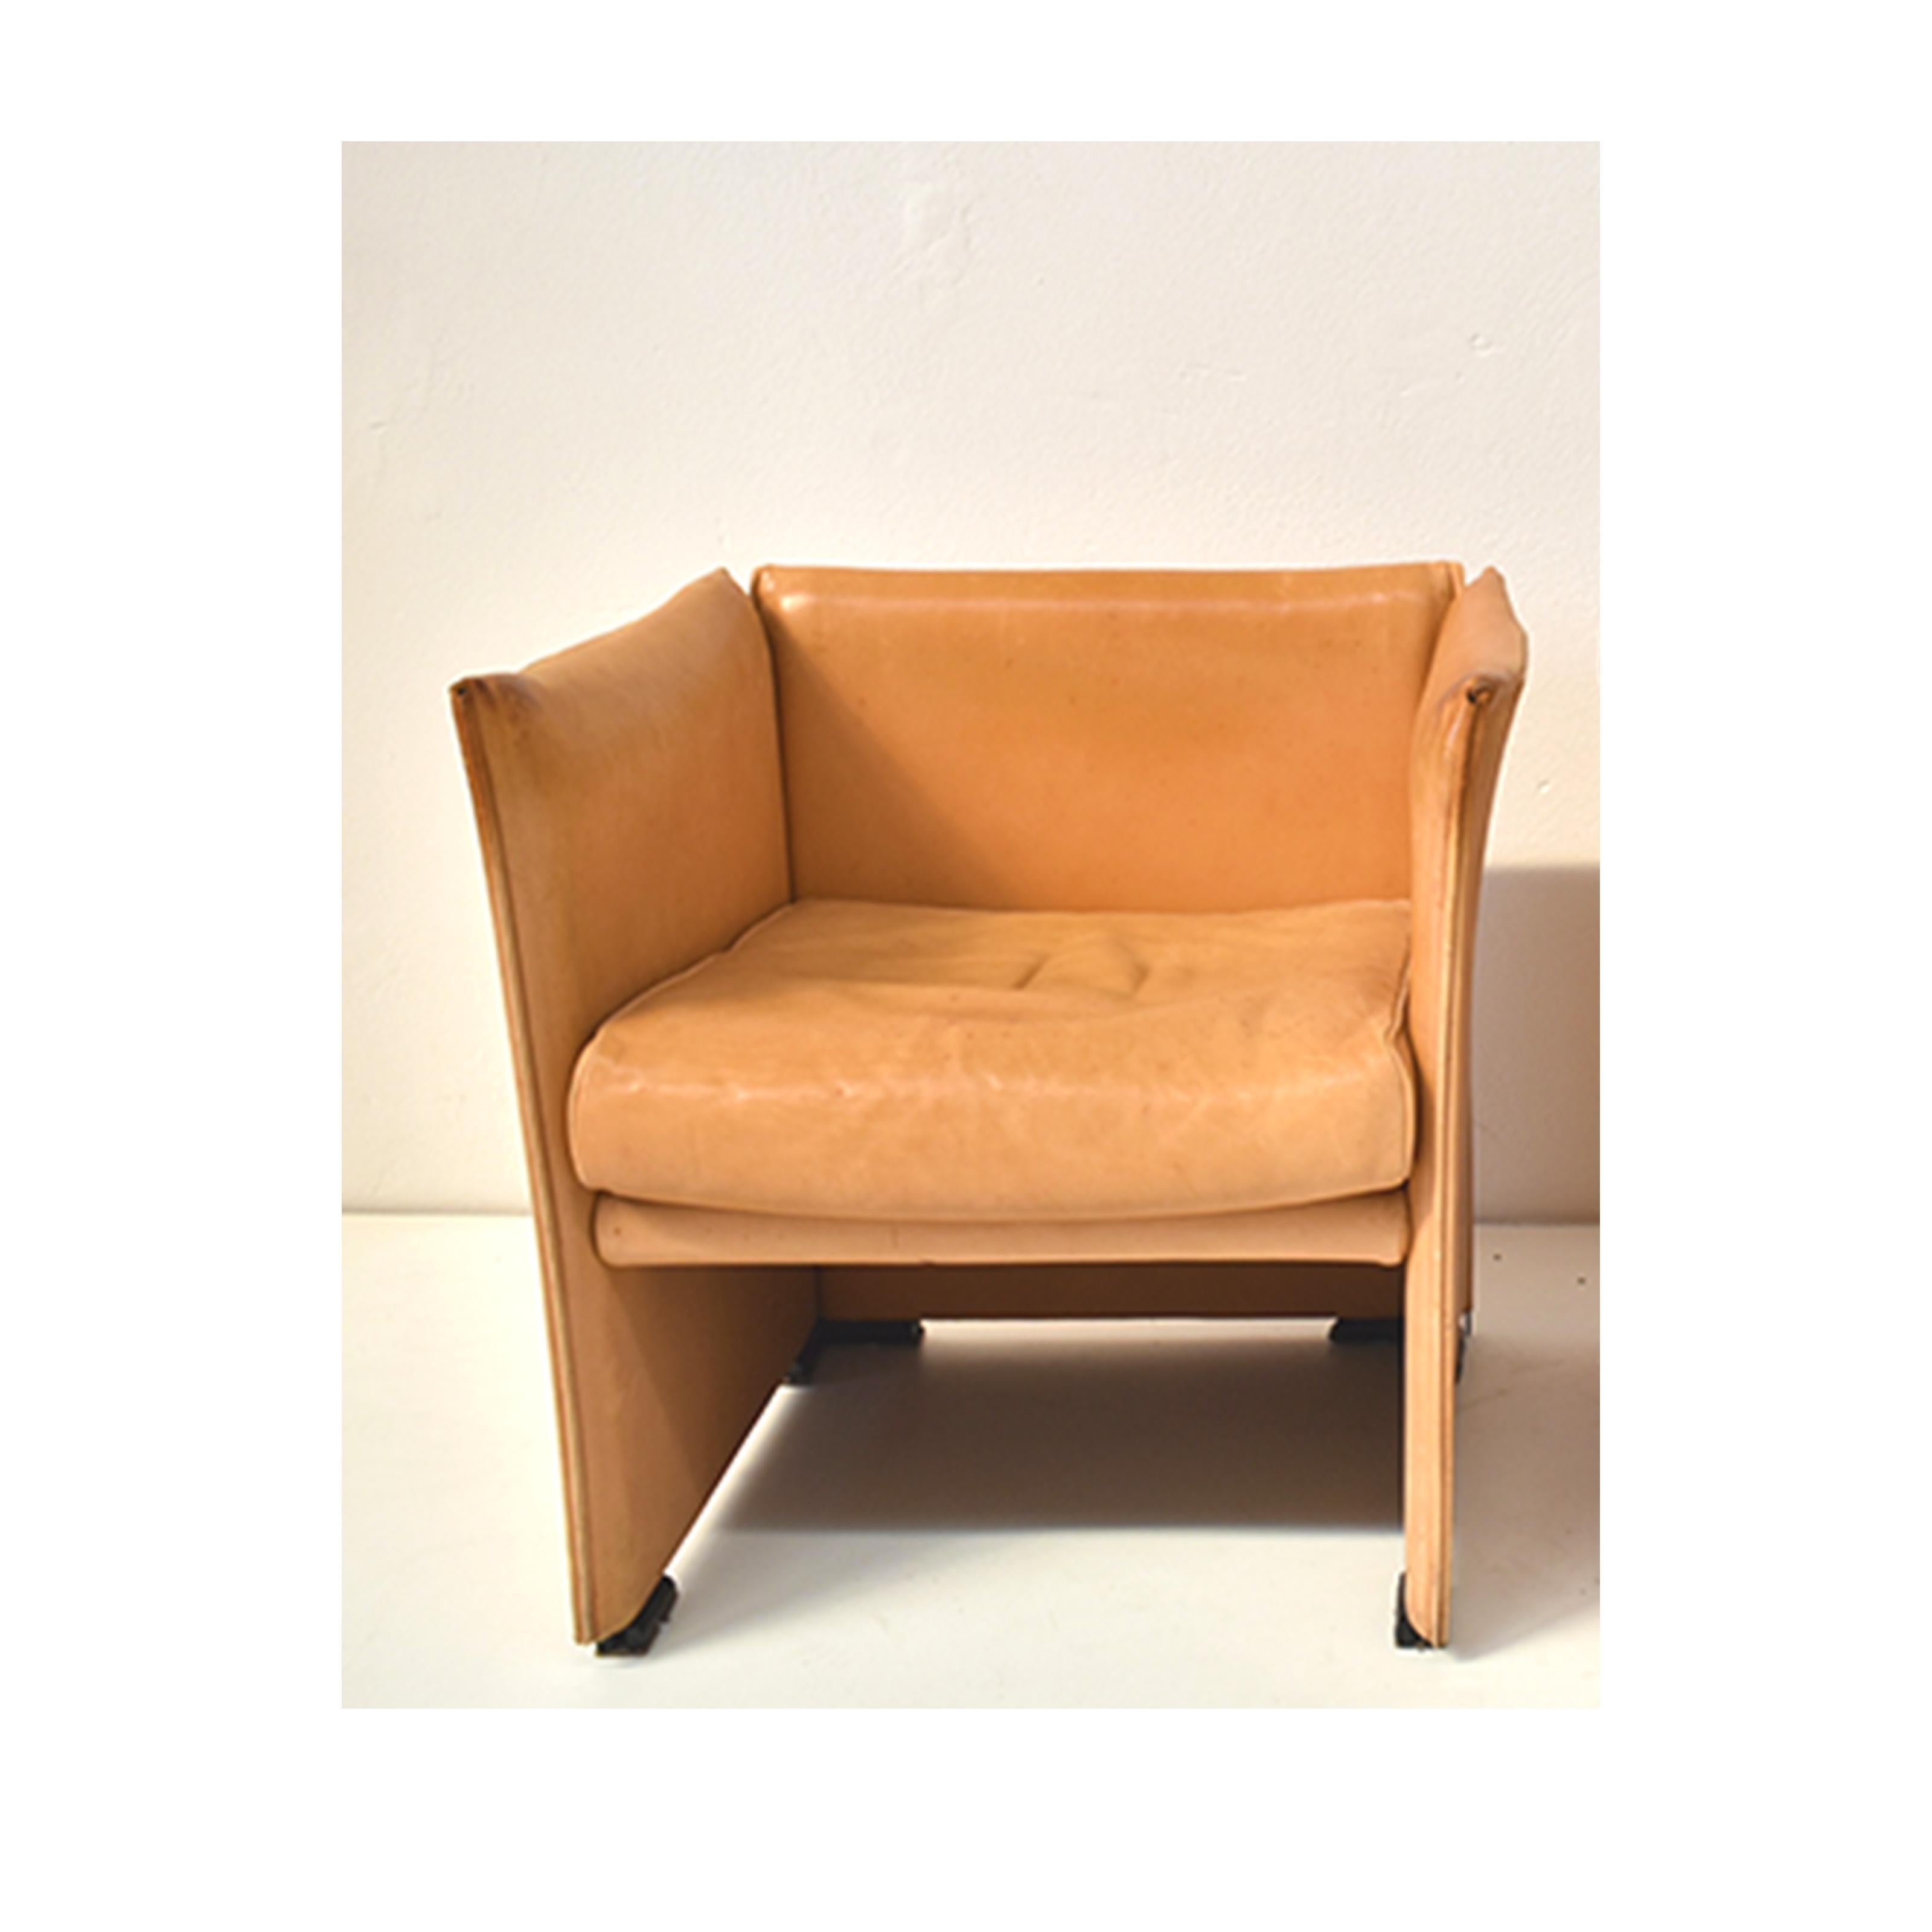 1970s vintage armchair, Italian manufacture, design by Mario Bellini, Cassina production.
The armchair has an orange leather upholstery
Vintage design in good condition; but the leather has various signs of time and wear